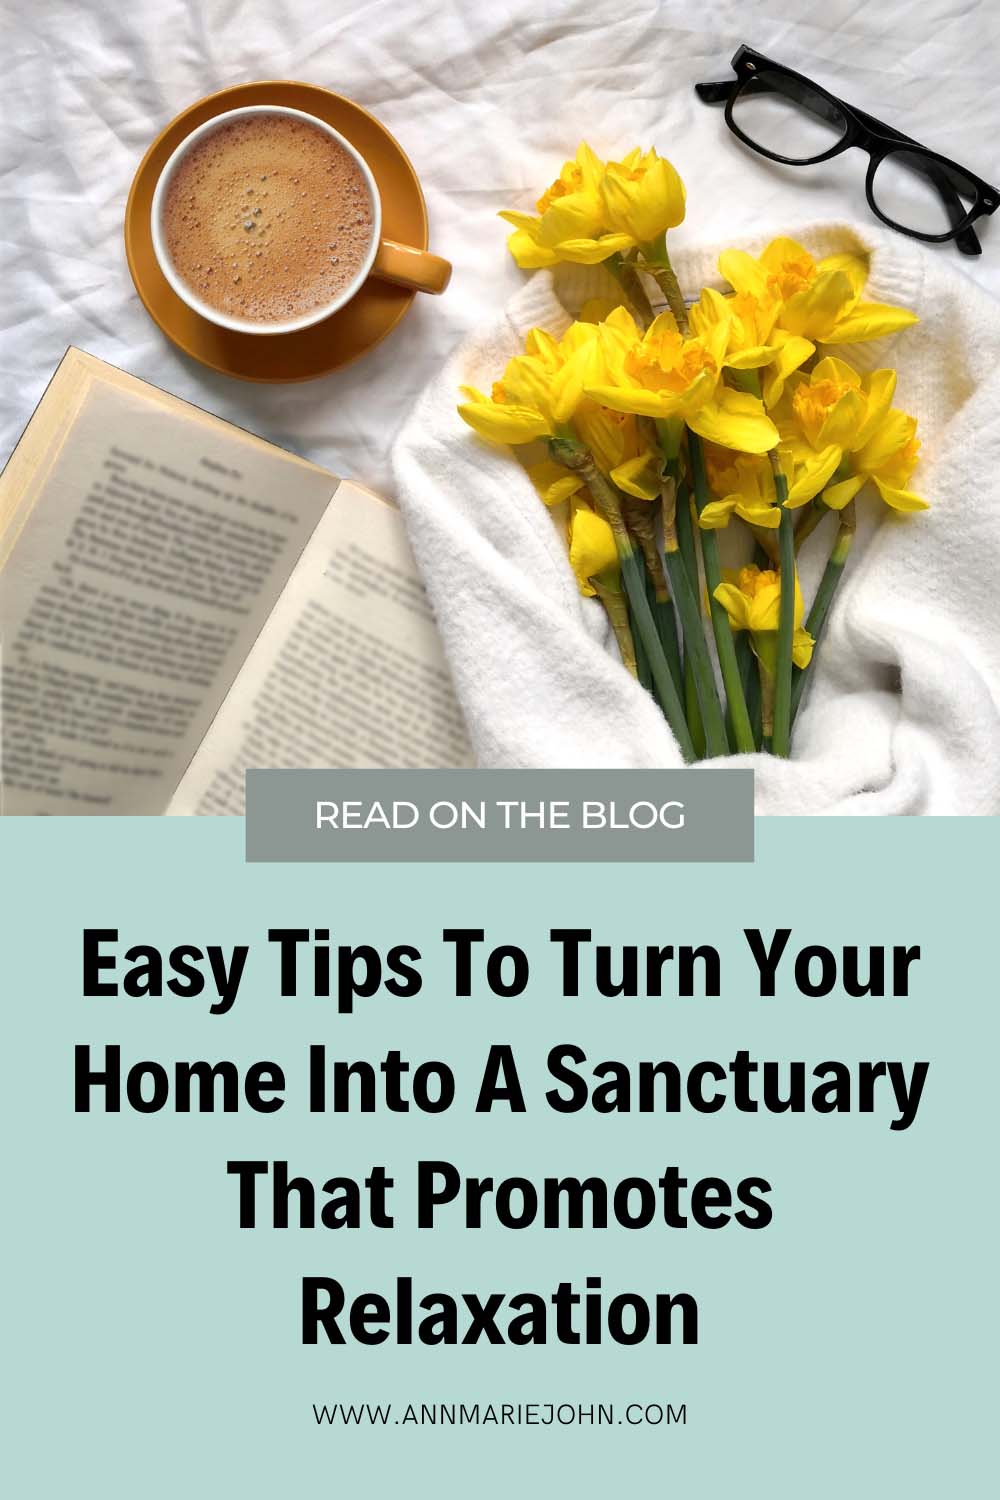 Easy Tips To Turn Your Home Into A Sanctuary That Promotes Relaxation